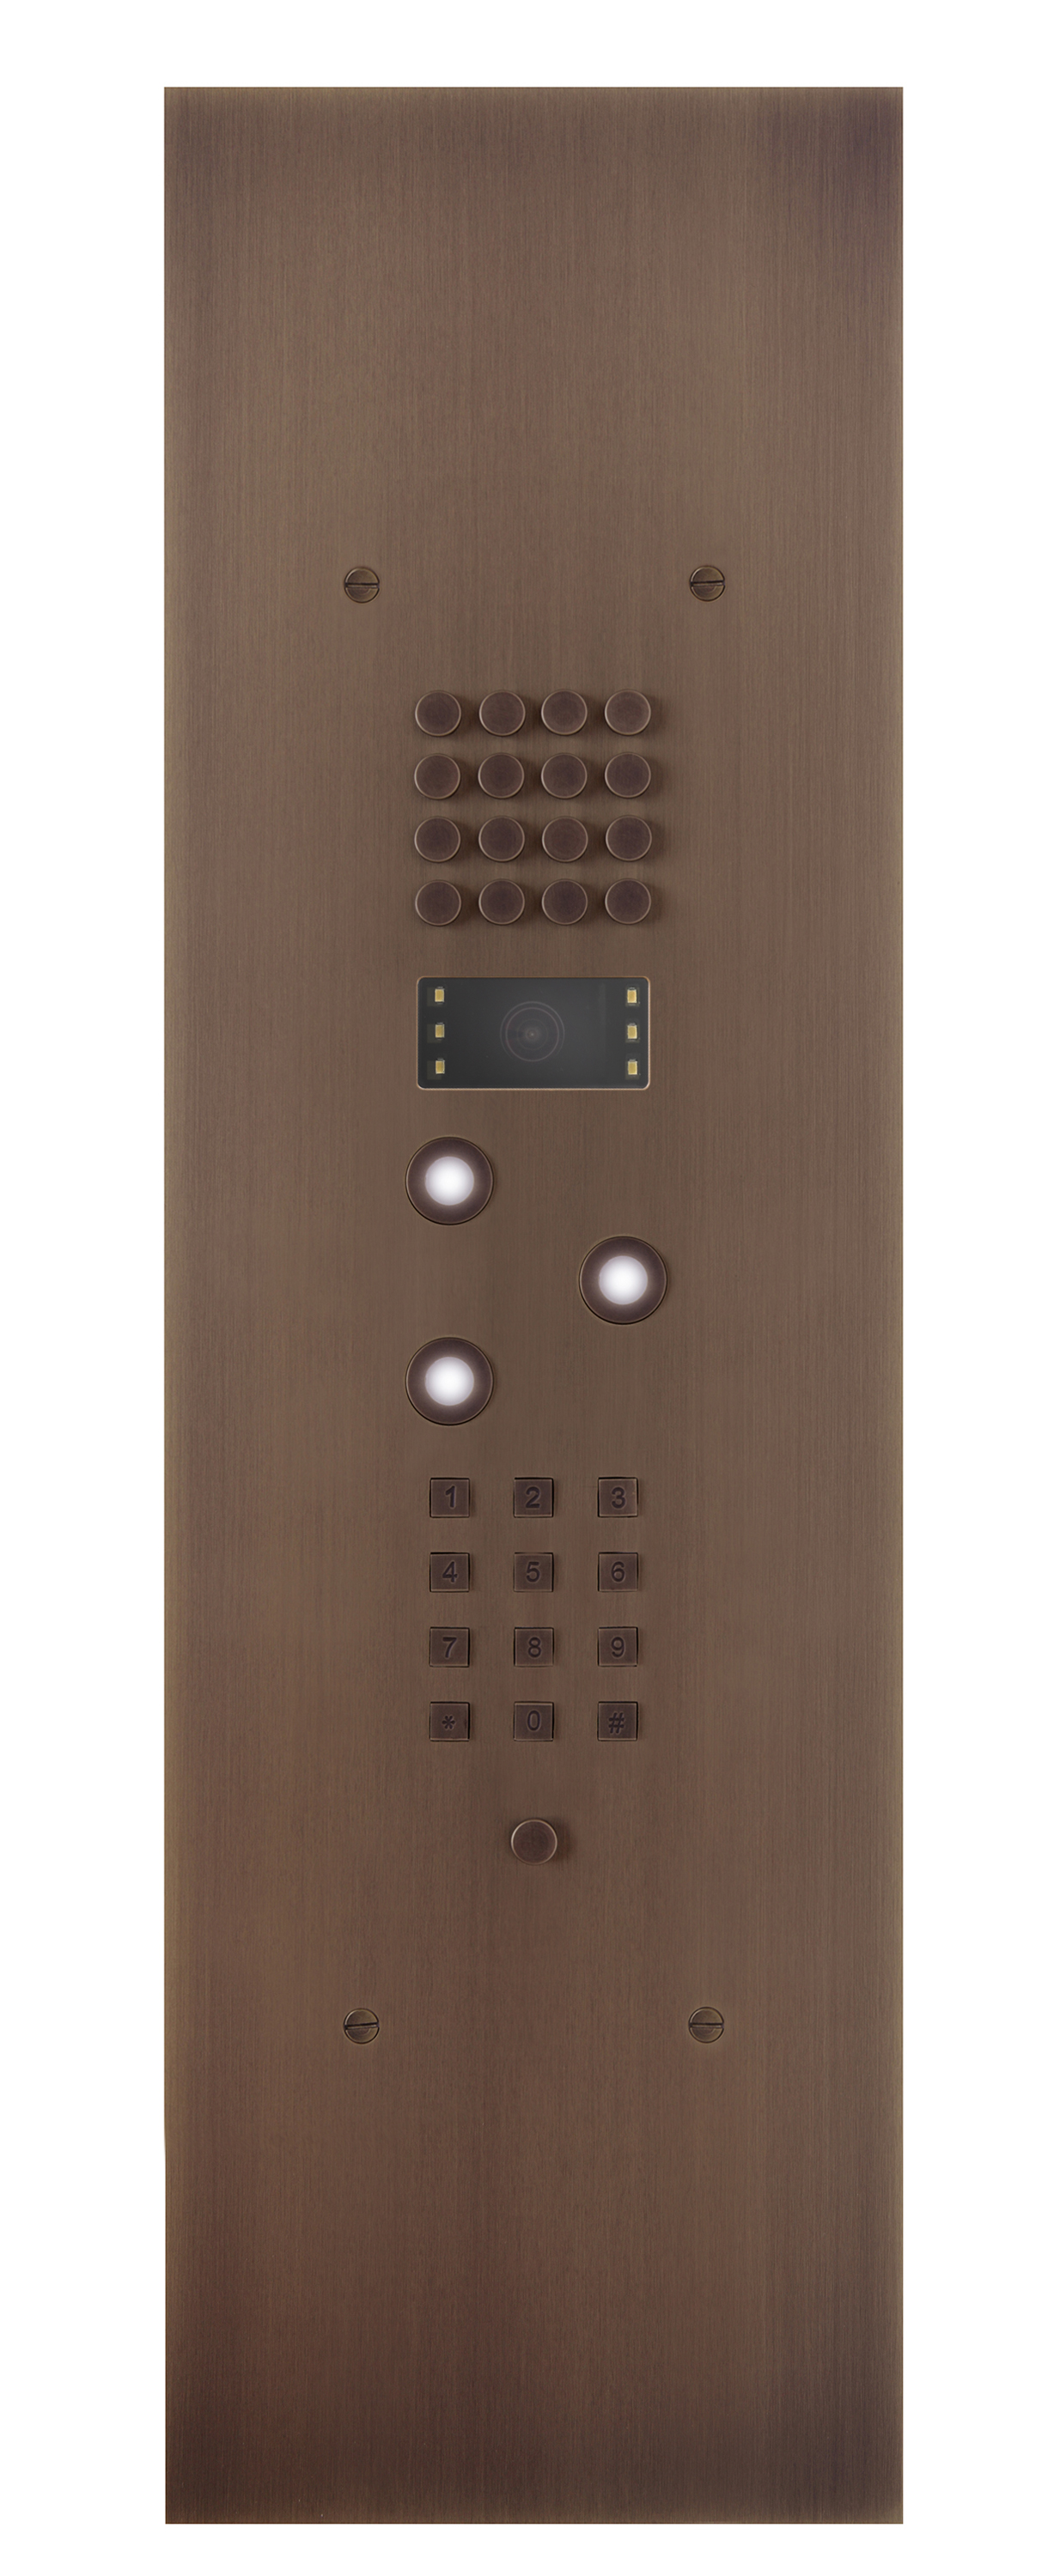 Wizard Bronze rustic IP 3 buttons large model, keypad and color cam